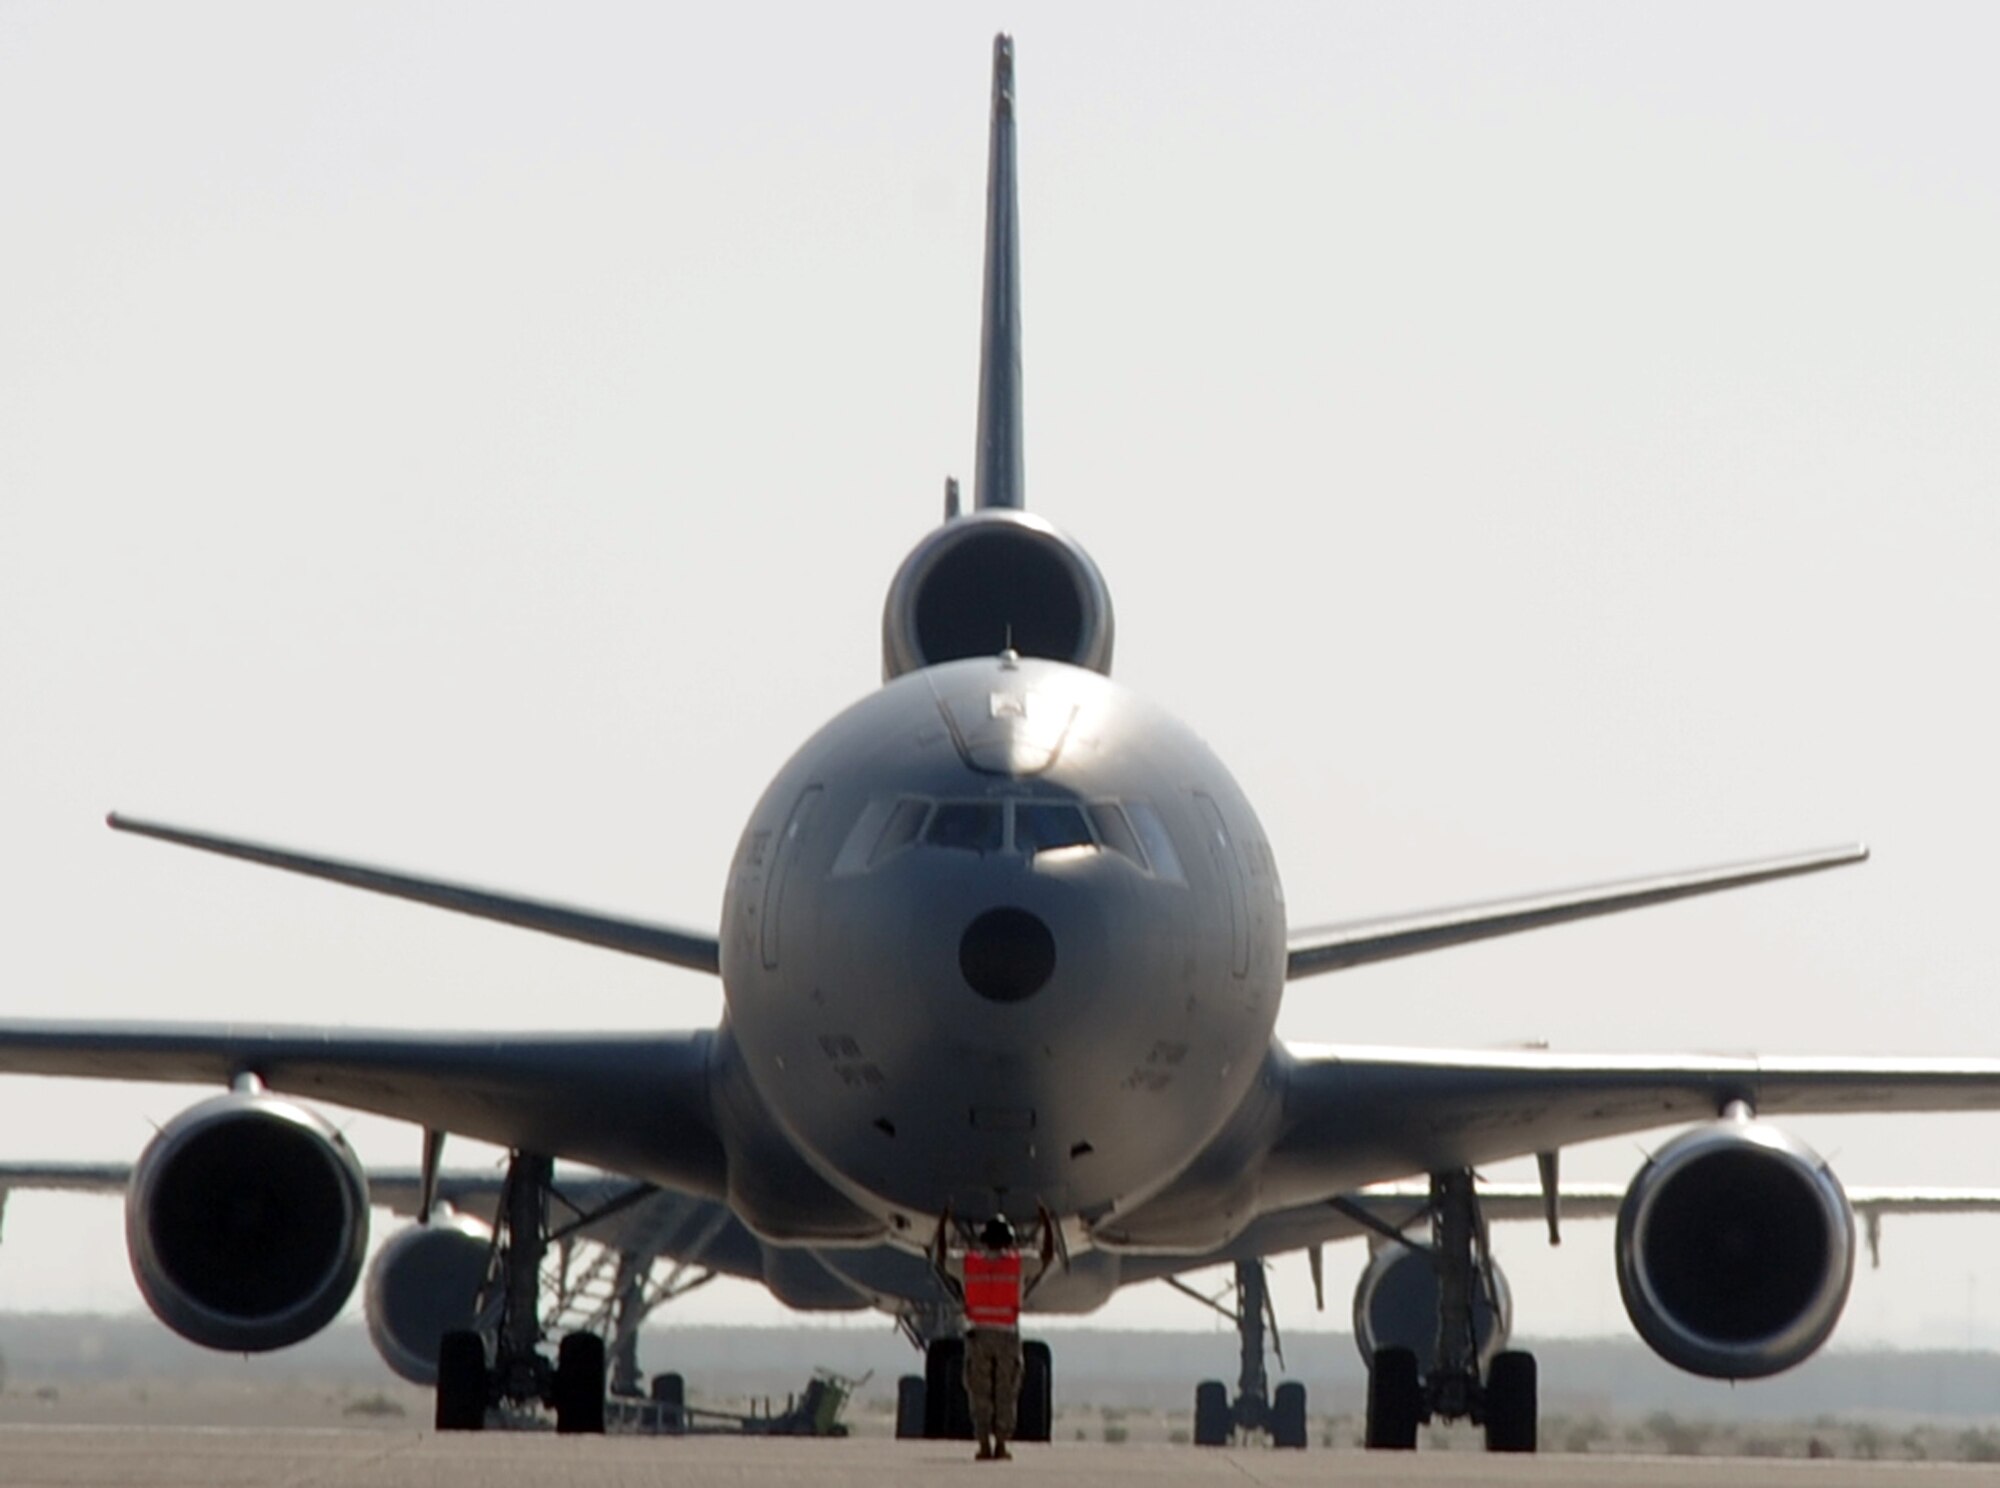 A maintenance Airmen provides direction to a KC-10 Extender as it moves out for a combat air refueling mission during operations on the flightline at a non-disclosed base in Southwest Asia on Jan. 22, 2009. The KC-10, assigned to the 908th Expeditionary Air Refueling Squadron, is one of Air Mobility Command's air refueling aircraft deployed to the U.S. Central Command area of responsibility that provides the "global reach" for Air Force and Department of Defense aircraft through air refueling operations for Operations Iraqi Freedom and Enduring Freedom and the Combined Joint Task Force-Horn of Africa. (U.S. Air Force Photo/Tech. Sgt. Scott T. Sturkol/Released)